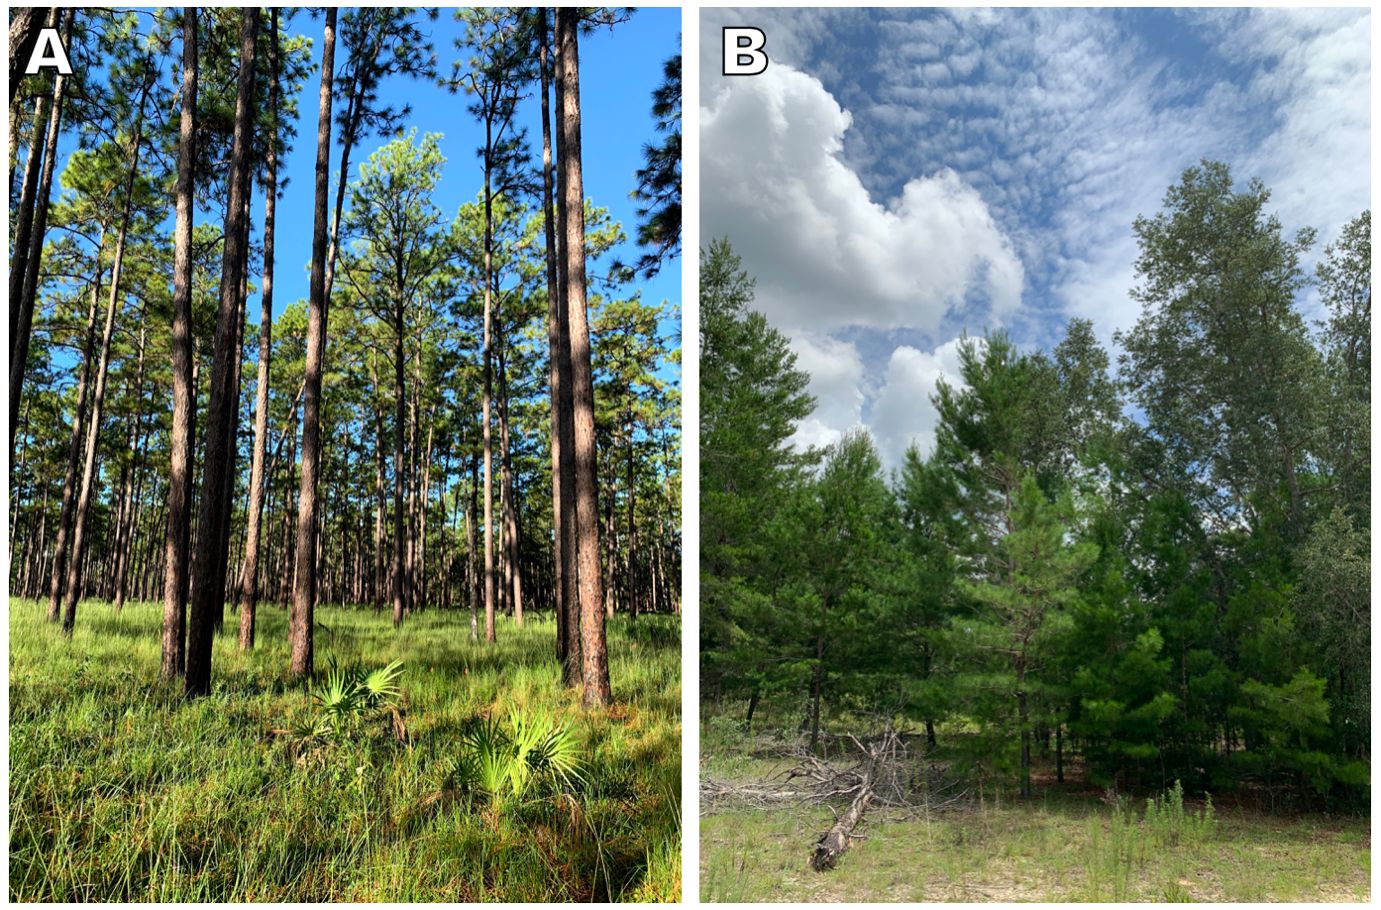 Many southern pines, such as longleaf pine (A), are good self-pruners, and their lower trunks are devoid of any branches. In contrast, sand pines (B), which do not self-prune, often have branches close to the ground, making them more likely to burn during a wildfire. 